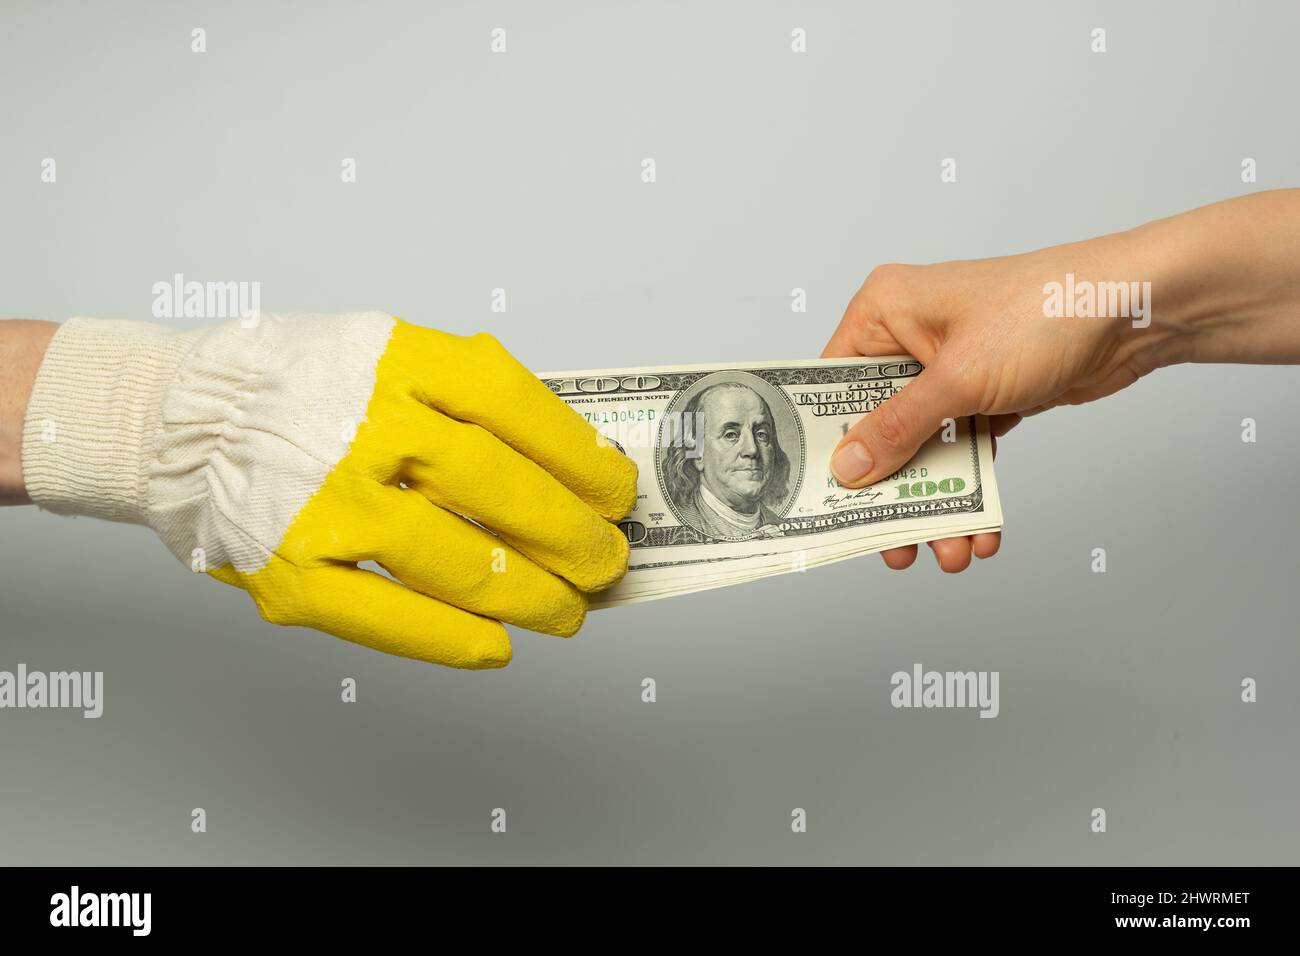 The builder's hand in a protective glove takes money from the customer. Stock Photo